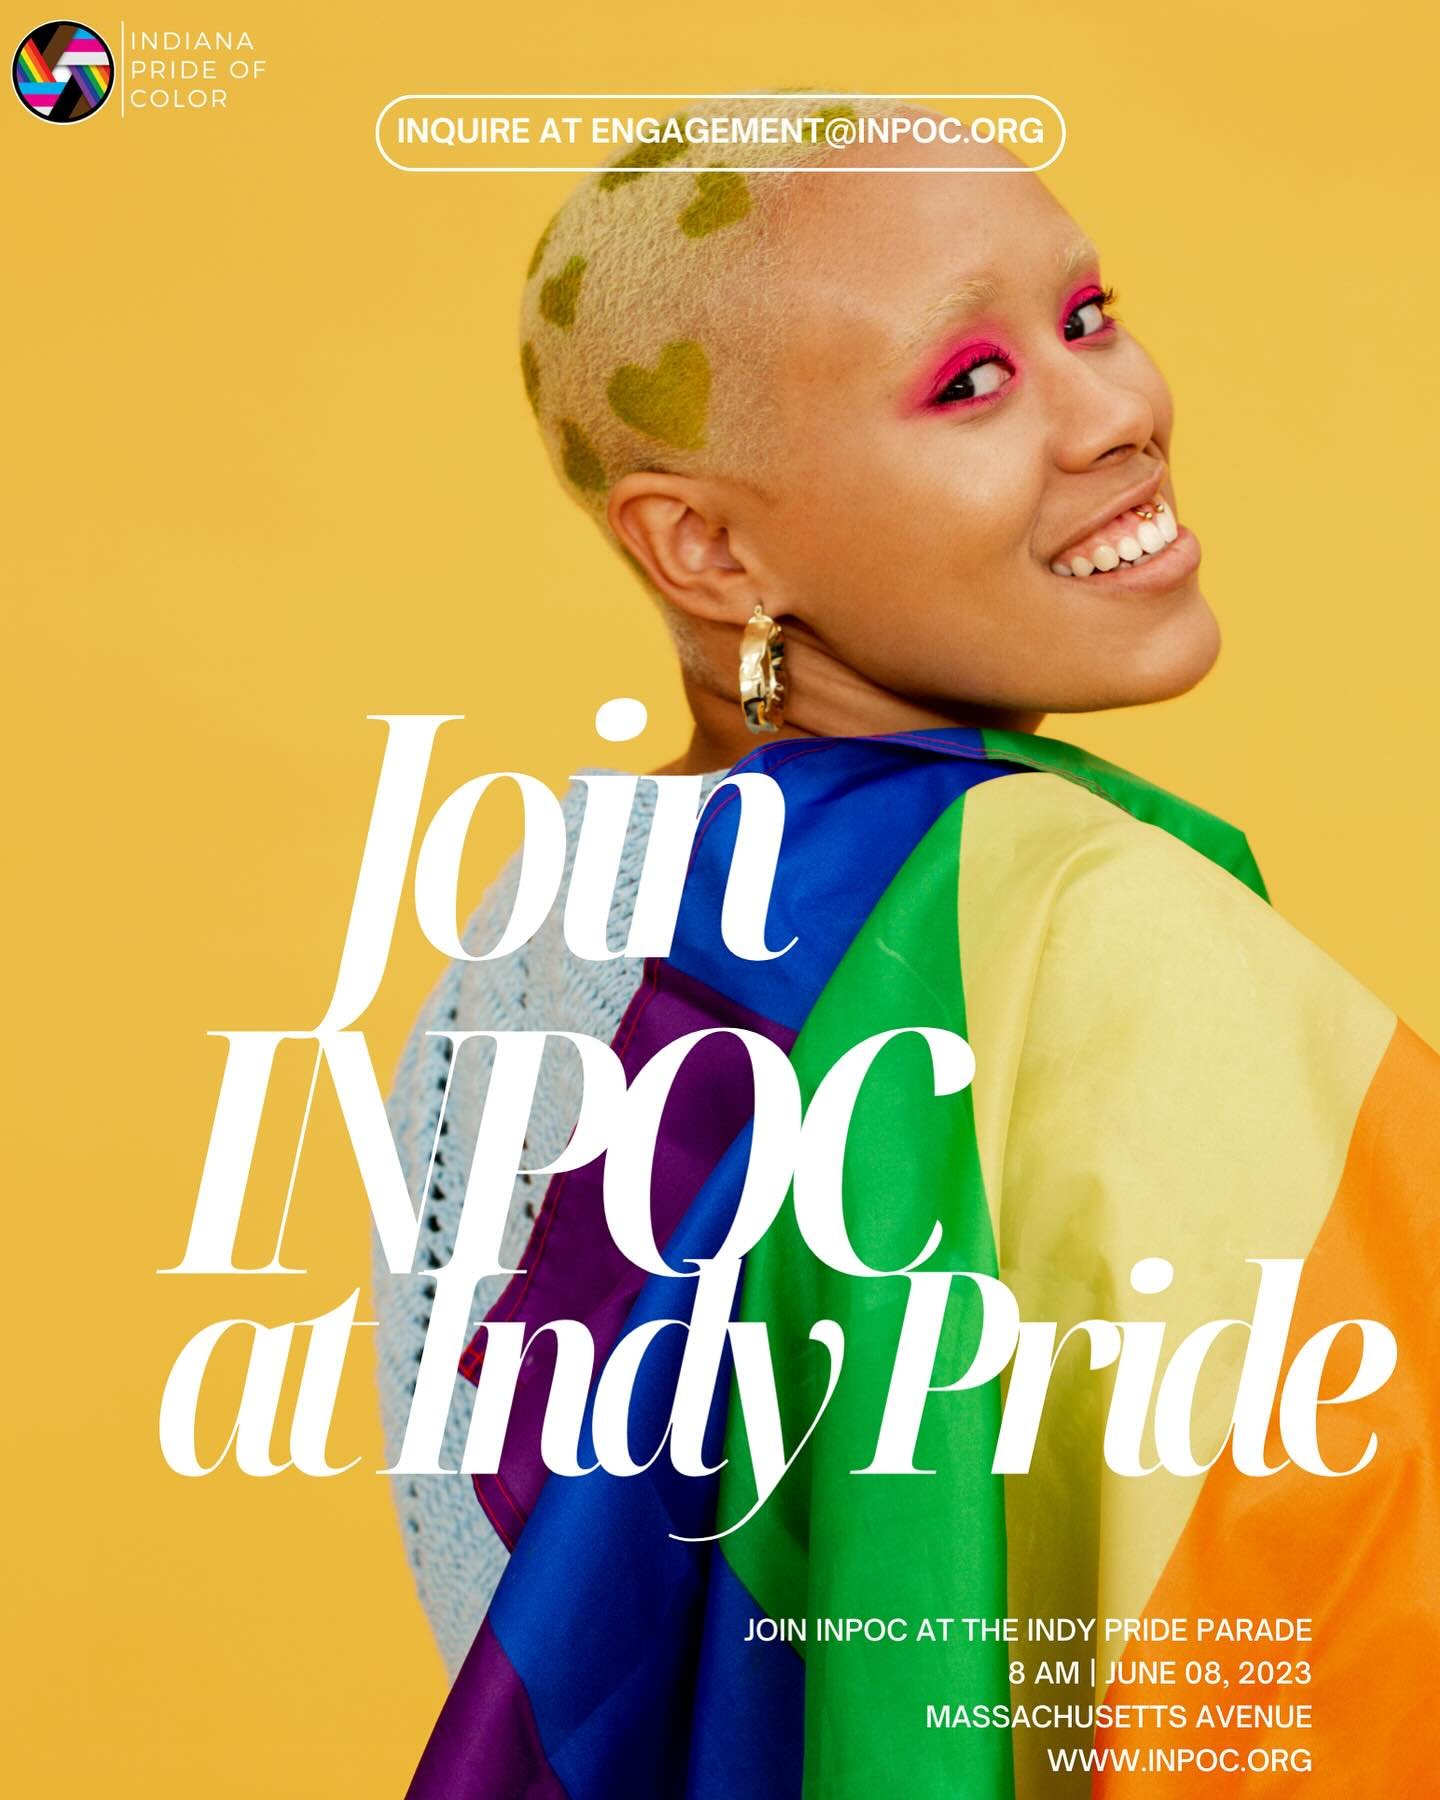 🌈 Join us in celebrating diversity and inclusion at the Indy Pride Parade on June 8th! 🌈

Please wear a purple shirt to show your support. INPOC swag will be provided for all our amazing volunteers. 

🔗 link in bio to sign up! 

Let&rsquo;s make t